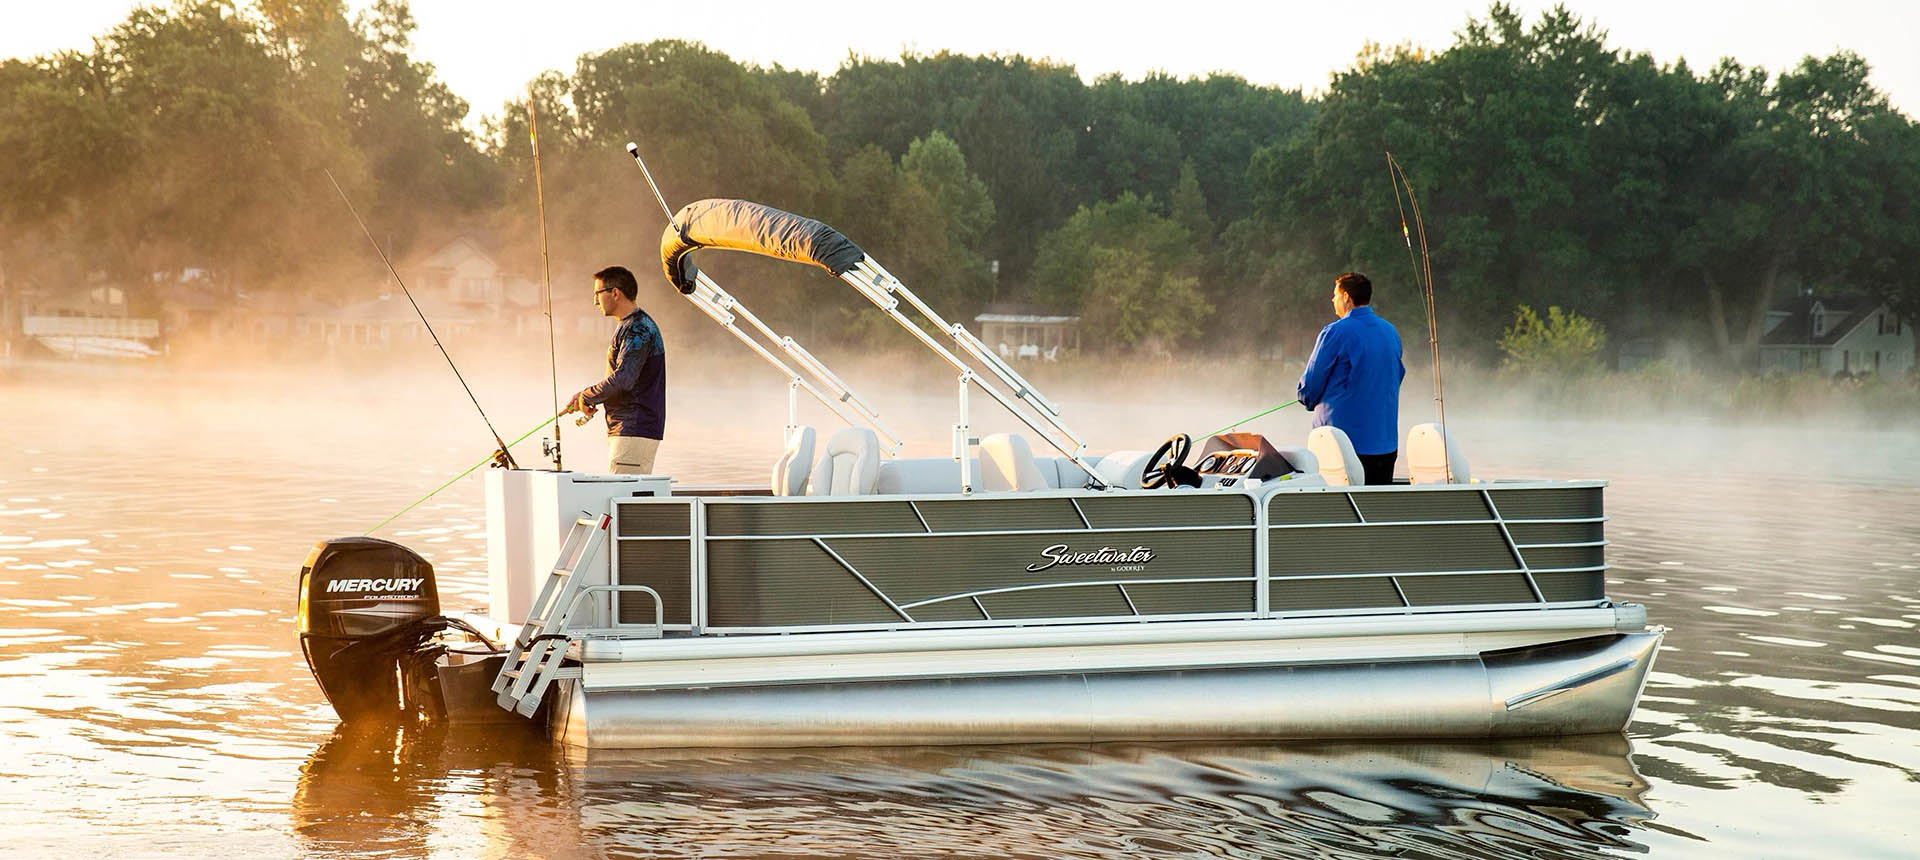 Godfrey Sweetwater Traditional Fishing 2286: Prices, Specs, Reviews and  Sales Information - itBoat